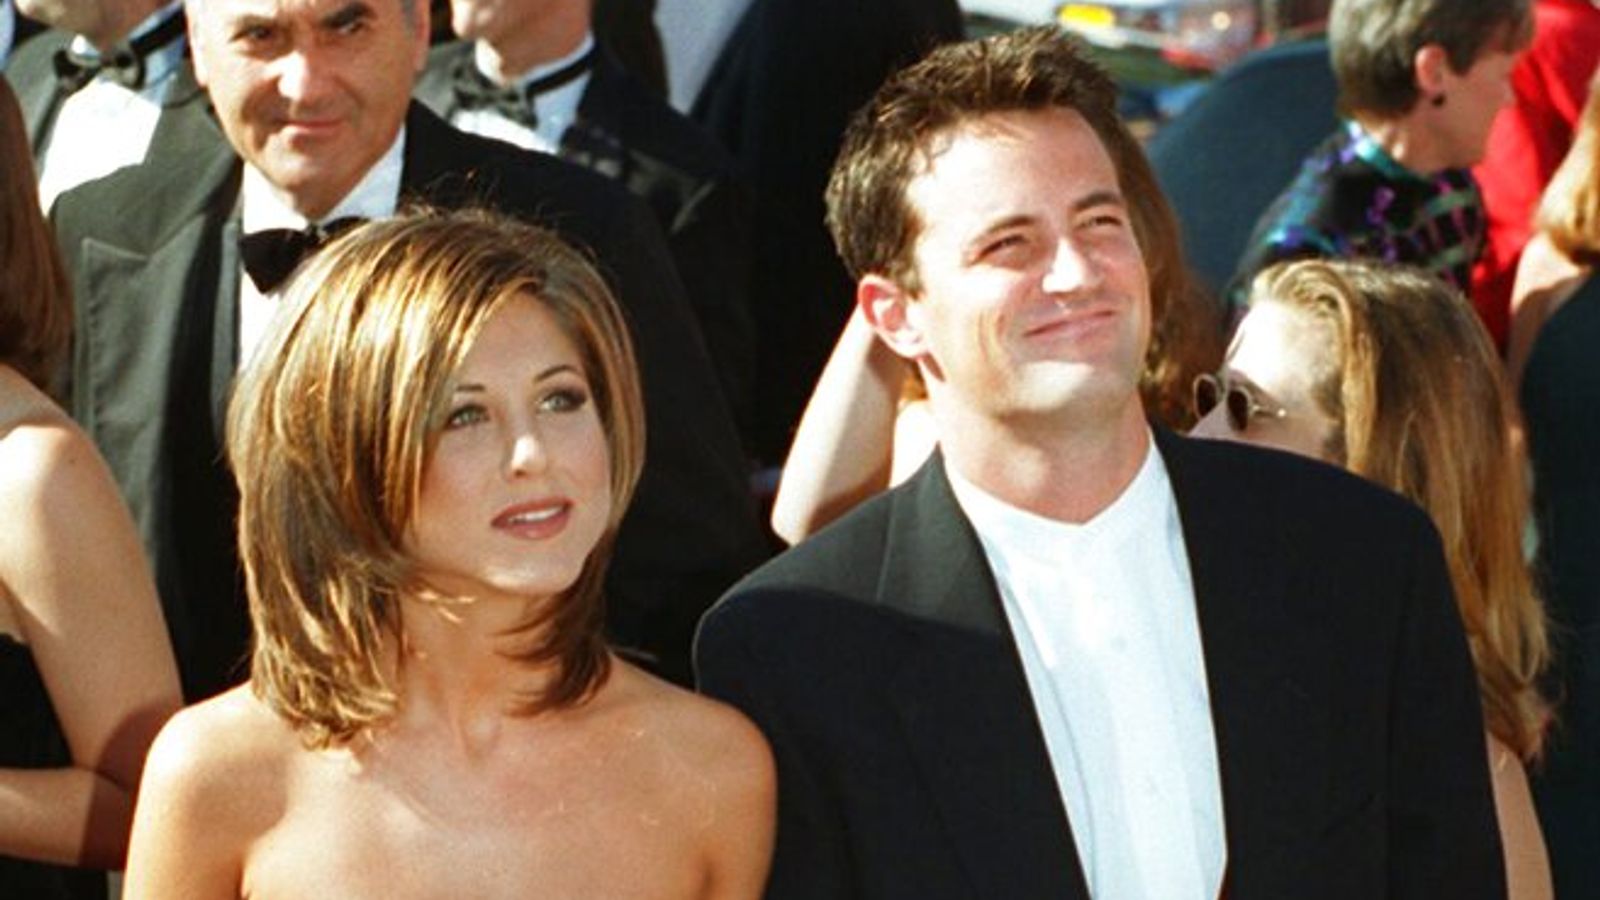 Jennifer Aniston shares text from Matthew Perry as she and David Schwimmer post tributes to their co-star